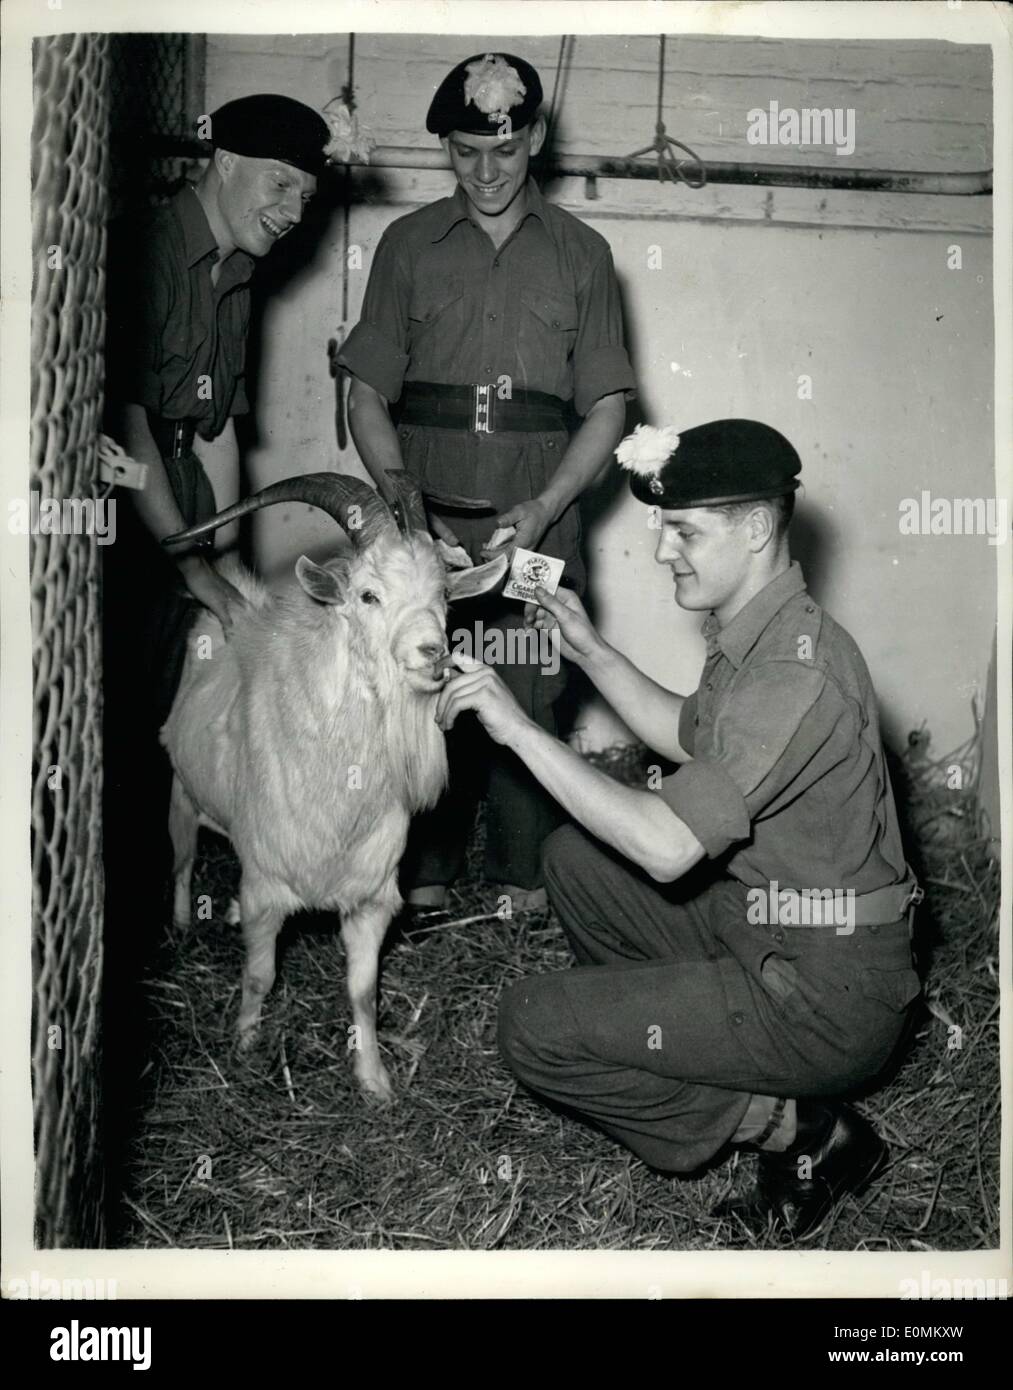 Oct. 10, 1955 - The Battalion goat enjoys cigarettes - for breakfast. The 1st. Battalion of the Royal welsh fusiliers at MooreBarracks, Dortmund, Germany - have a new goat to replace Bill, the ten years old goat who died last November. The new goat prefers a breakfast of cigarettes there than one of grass, etc. Photo shows Billy - the new goat of the 1st. Battalion, Royal Walsh Fusiieers - enjoys his cigarette breakfast at Moore barracks, Dortmund , Germany. Stock Photo